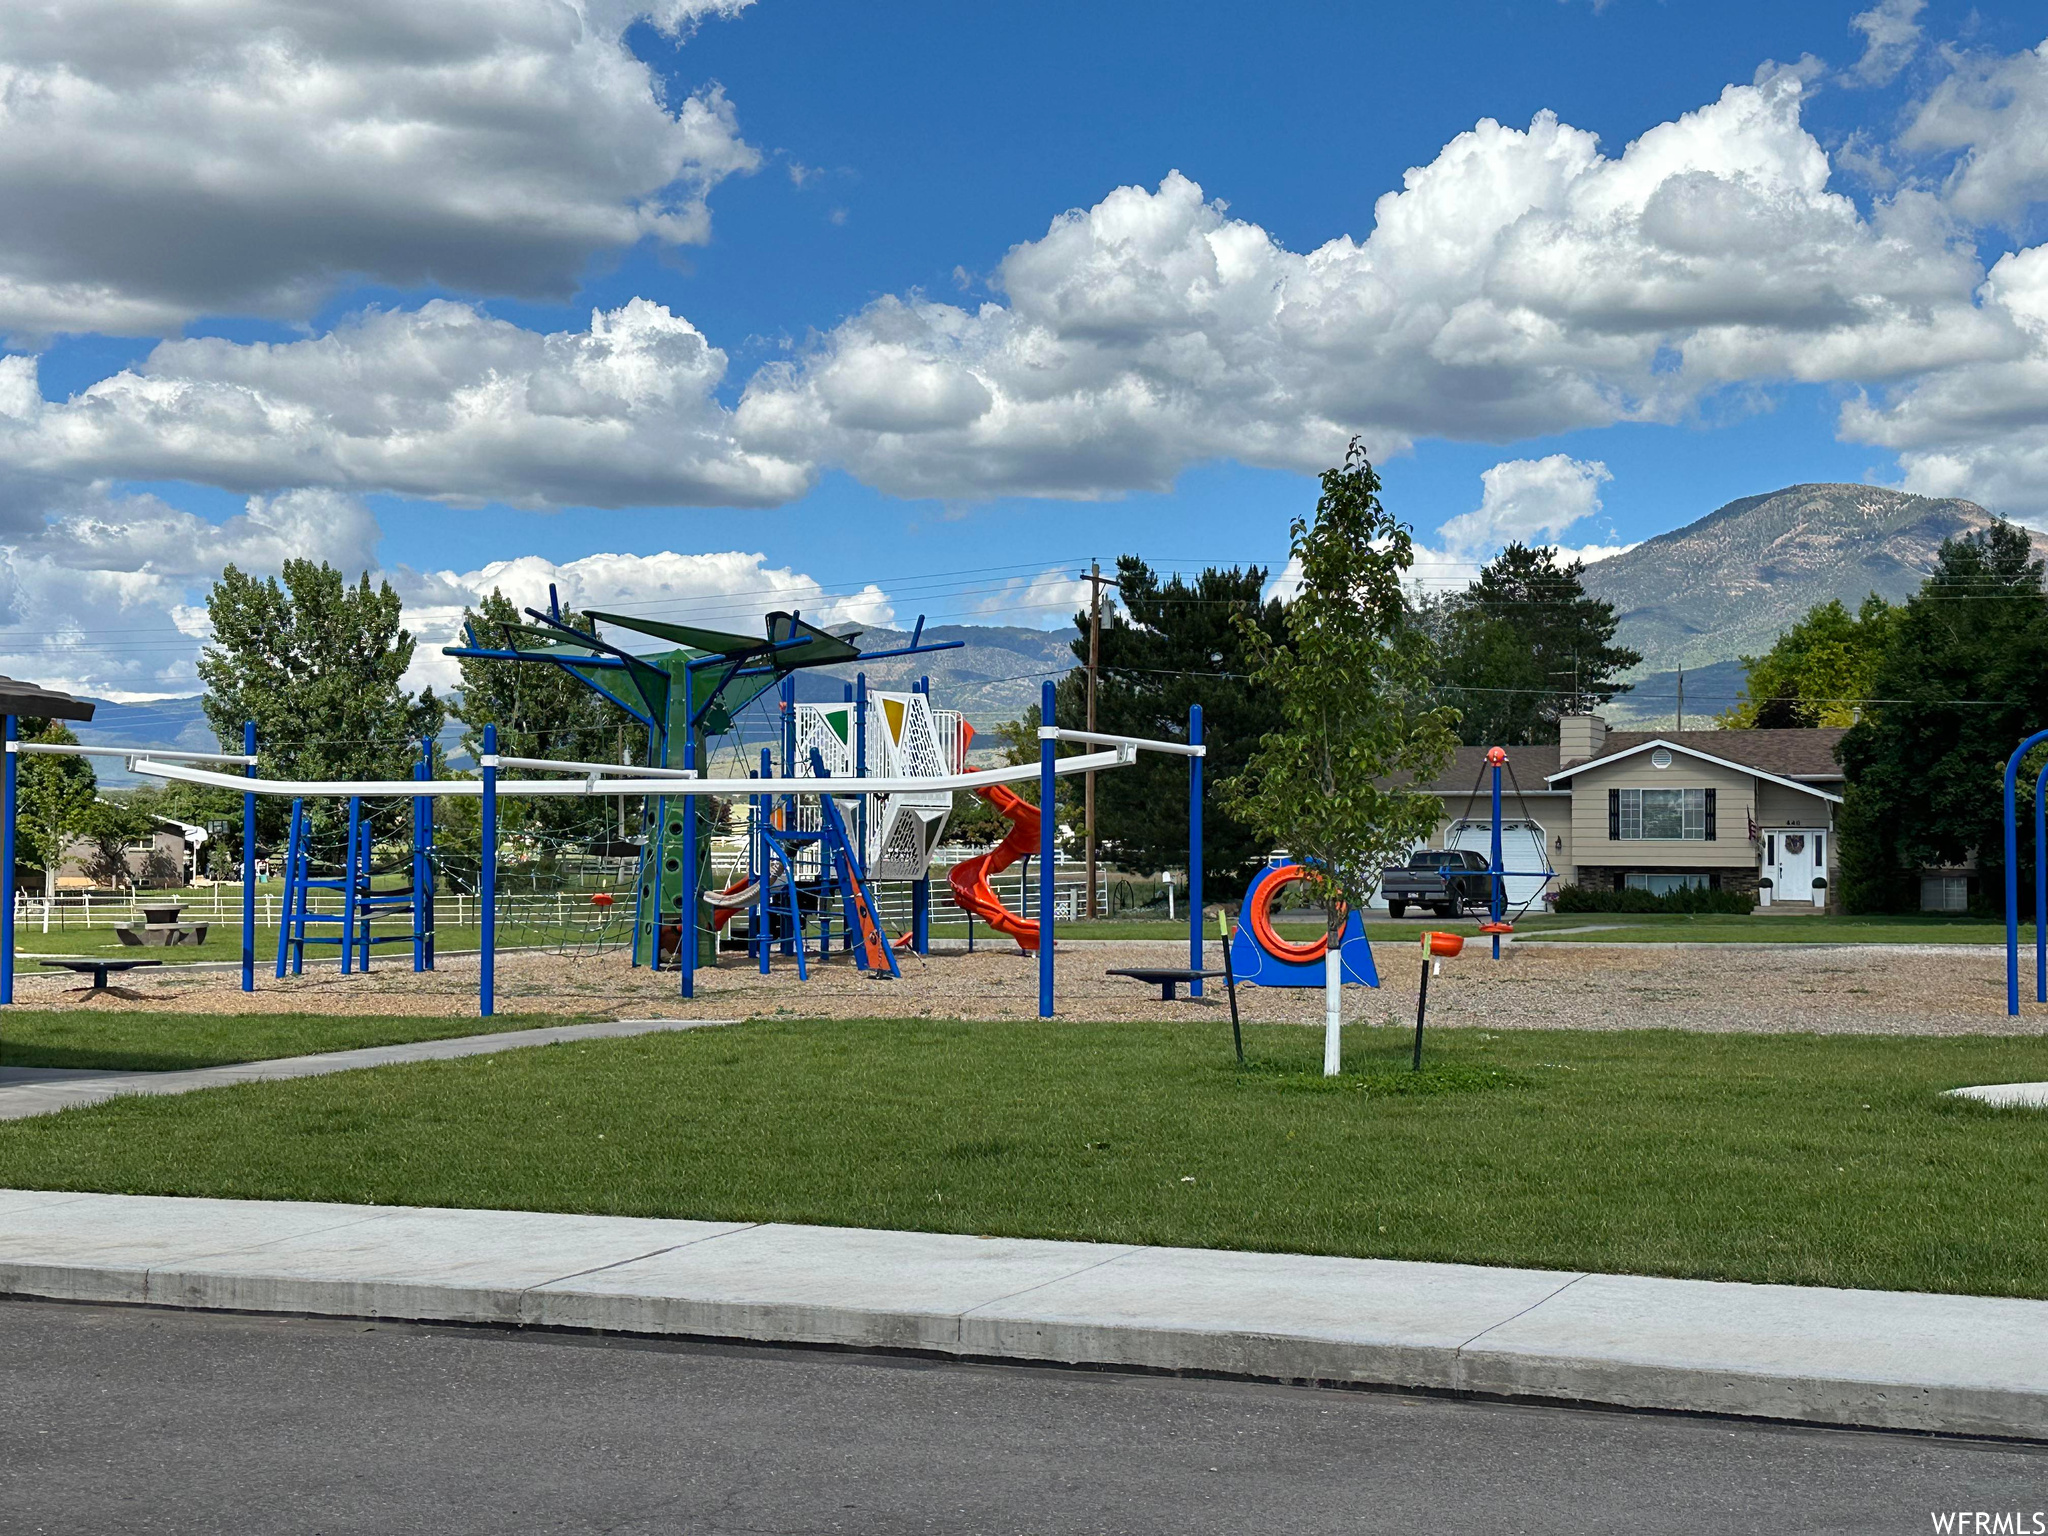 View of jungle gym featuring a yard and a mountain view